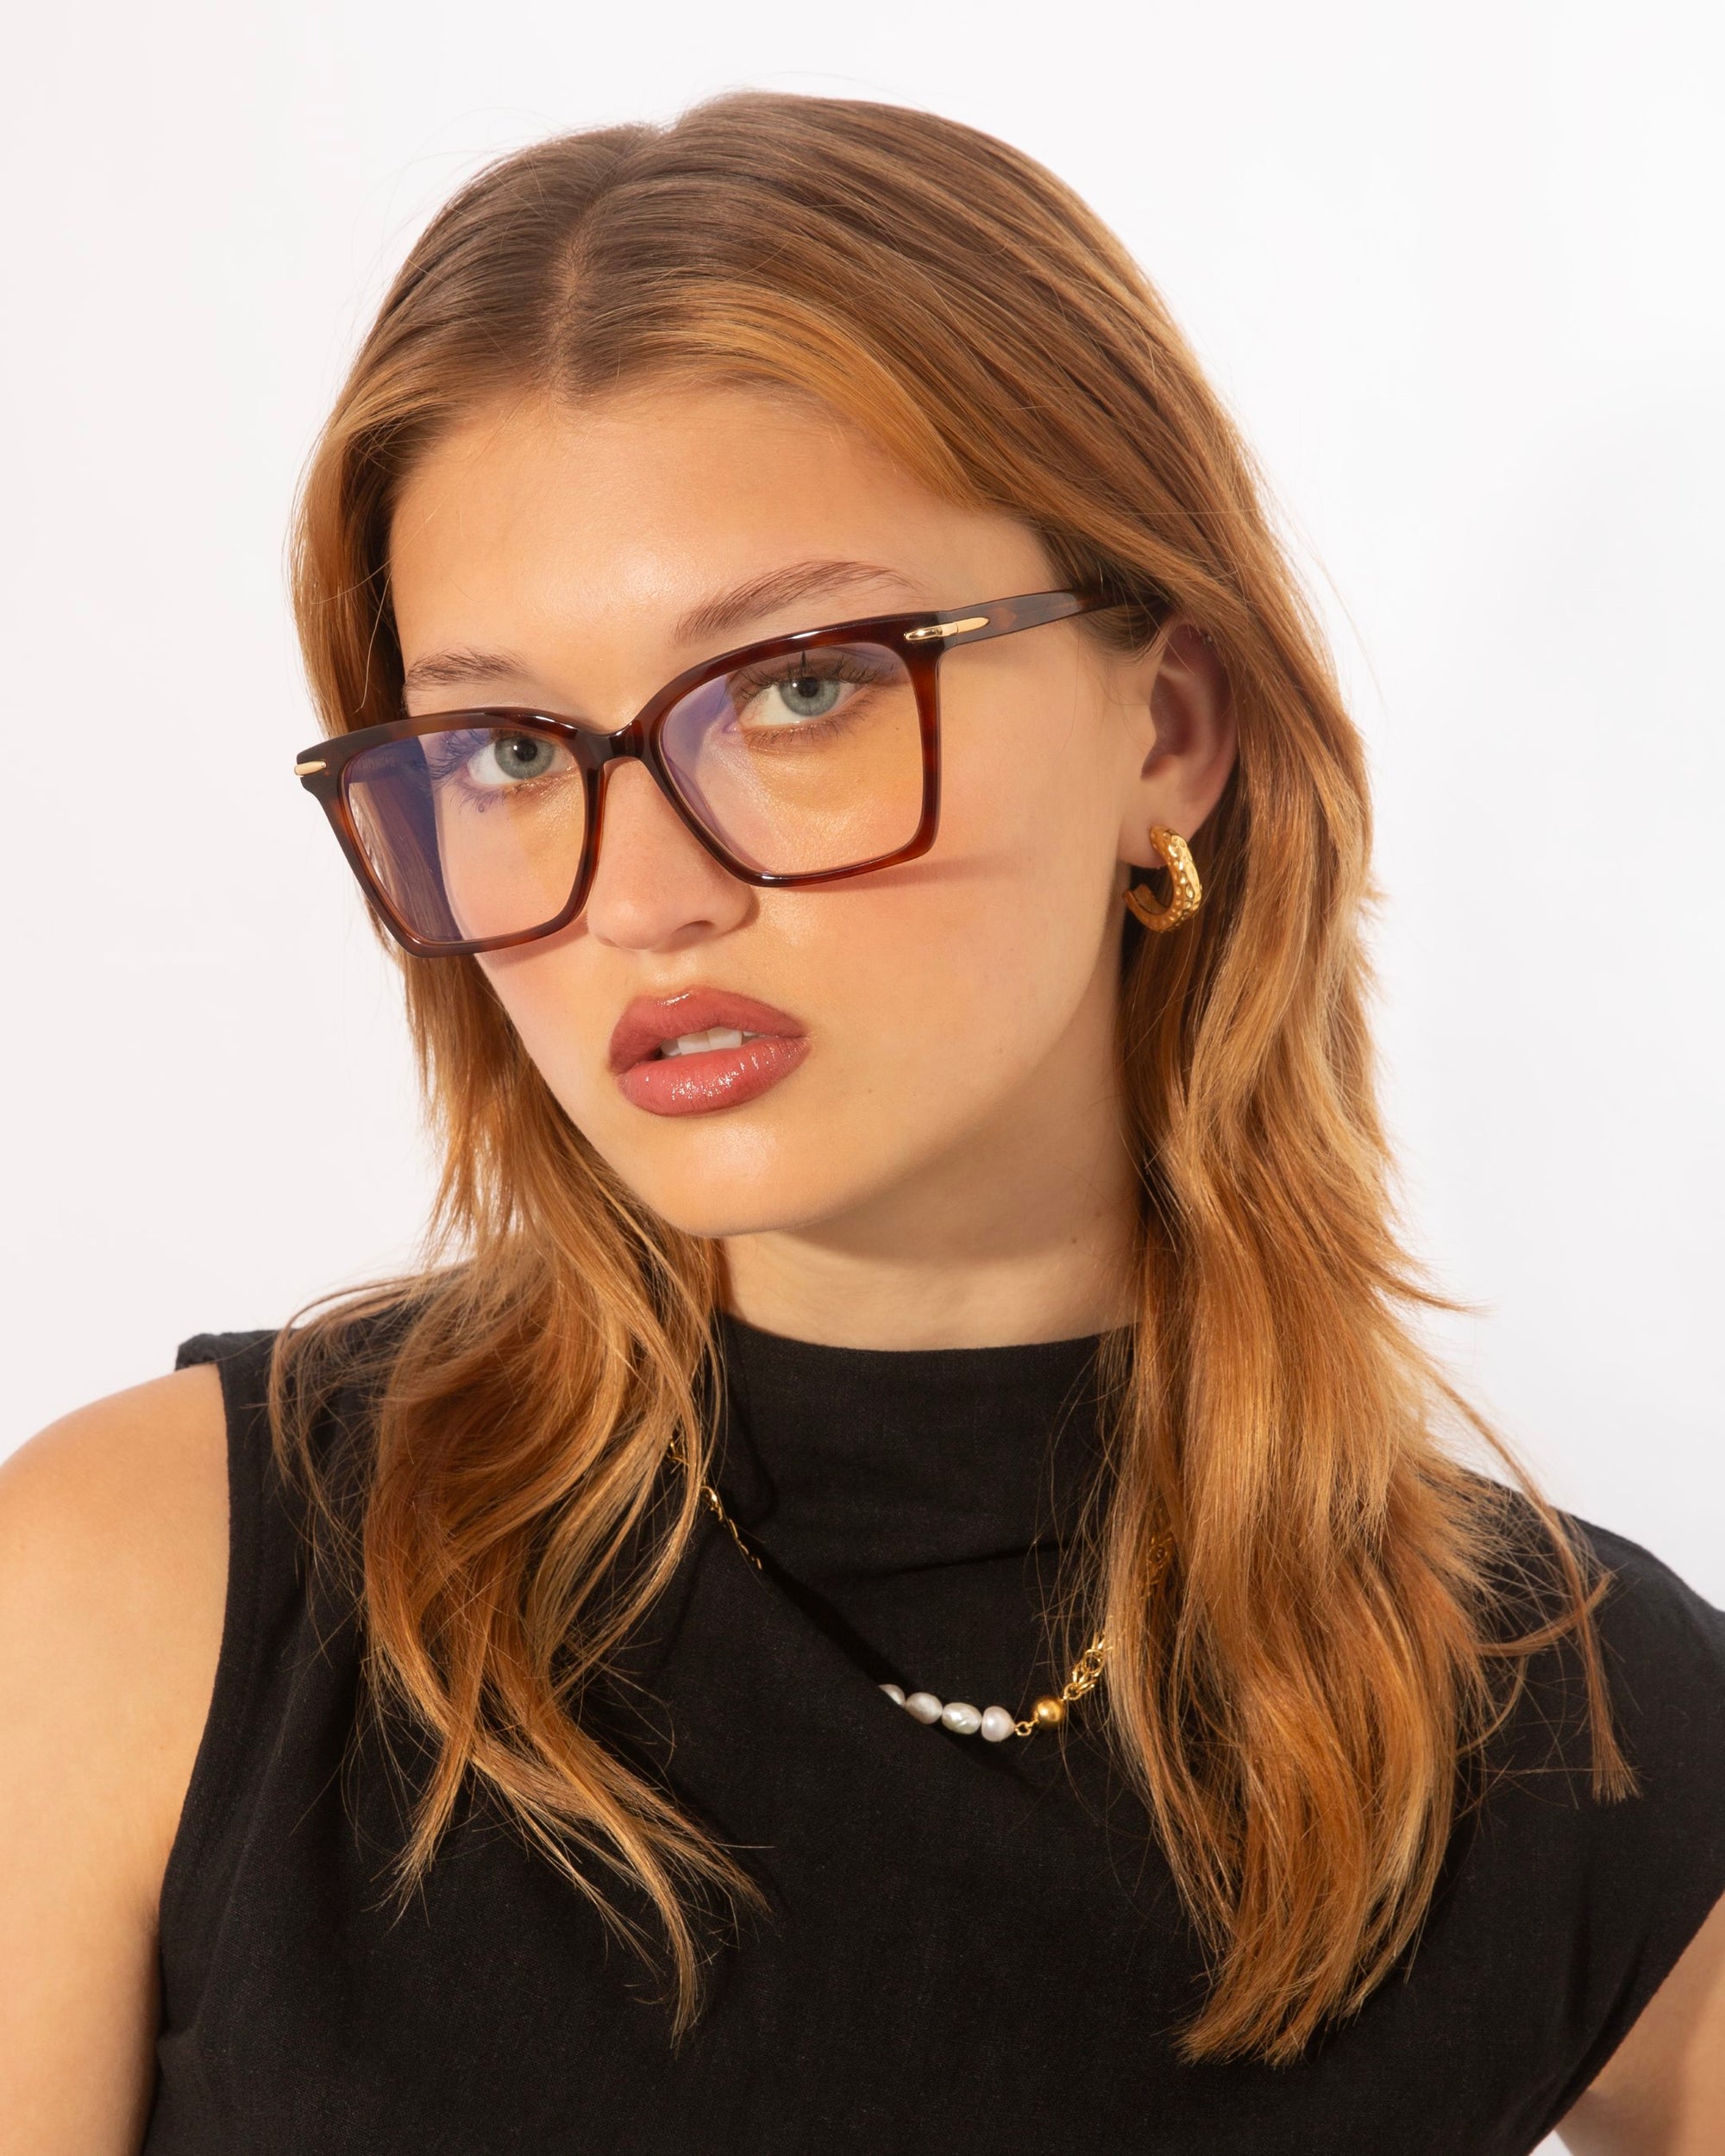 A woman with long, light brown hair is wearing rectangular Azure optical glasses by For Art's Sake® with a brown frame. She has a serious expression, with her head slightly tilted. Dressed in a sleeveless black top and accessorized with small hoop earrings and a delicate necklace, she stands against a white background.